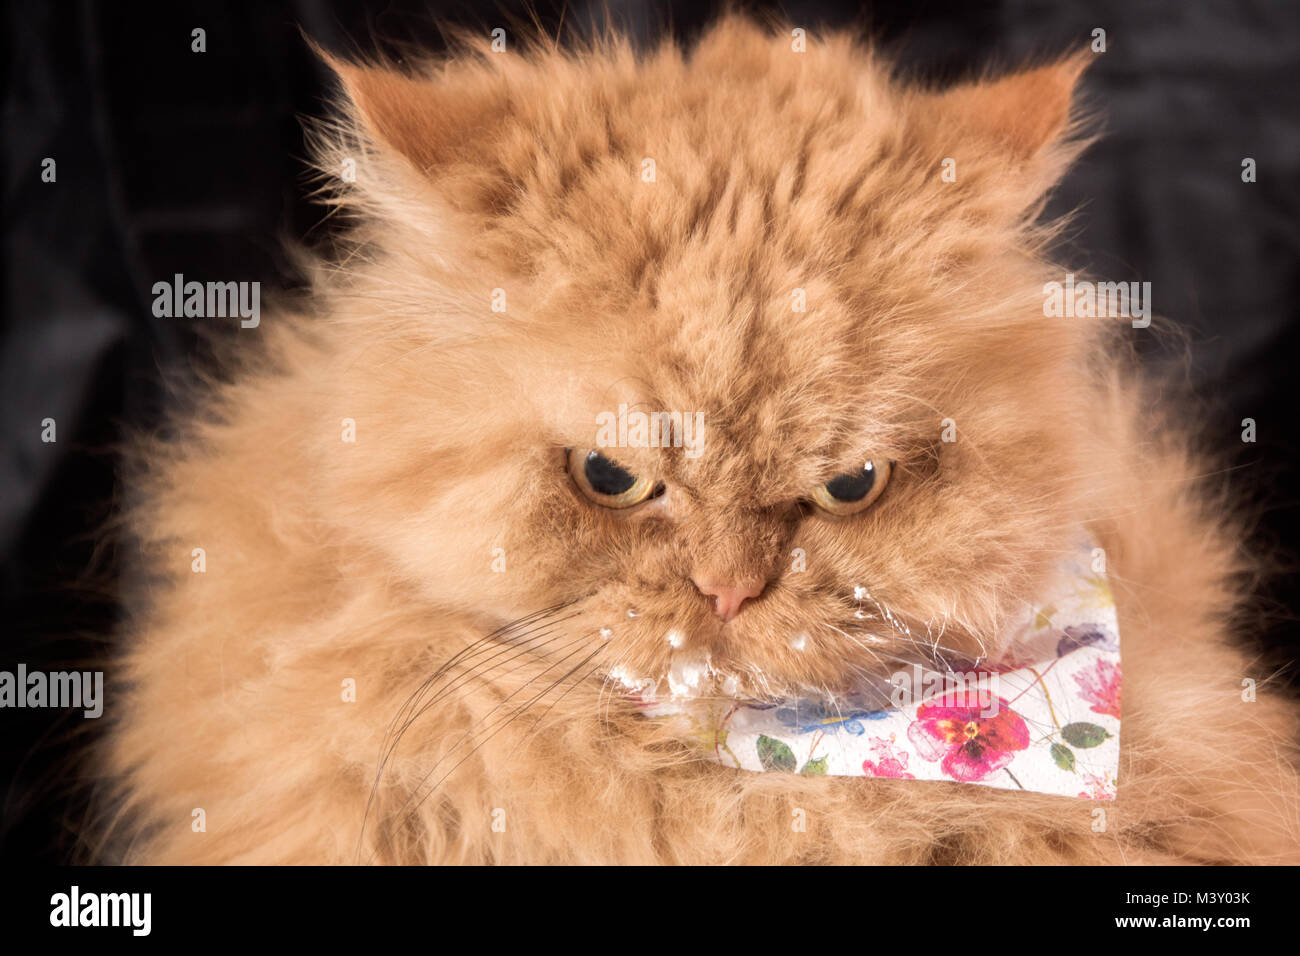 Close up portrait of orange Persian cat after drinking milk Stock Photo